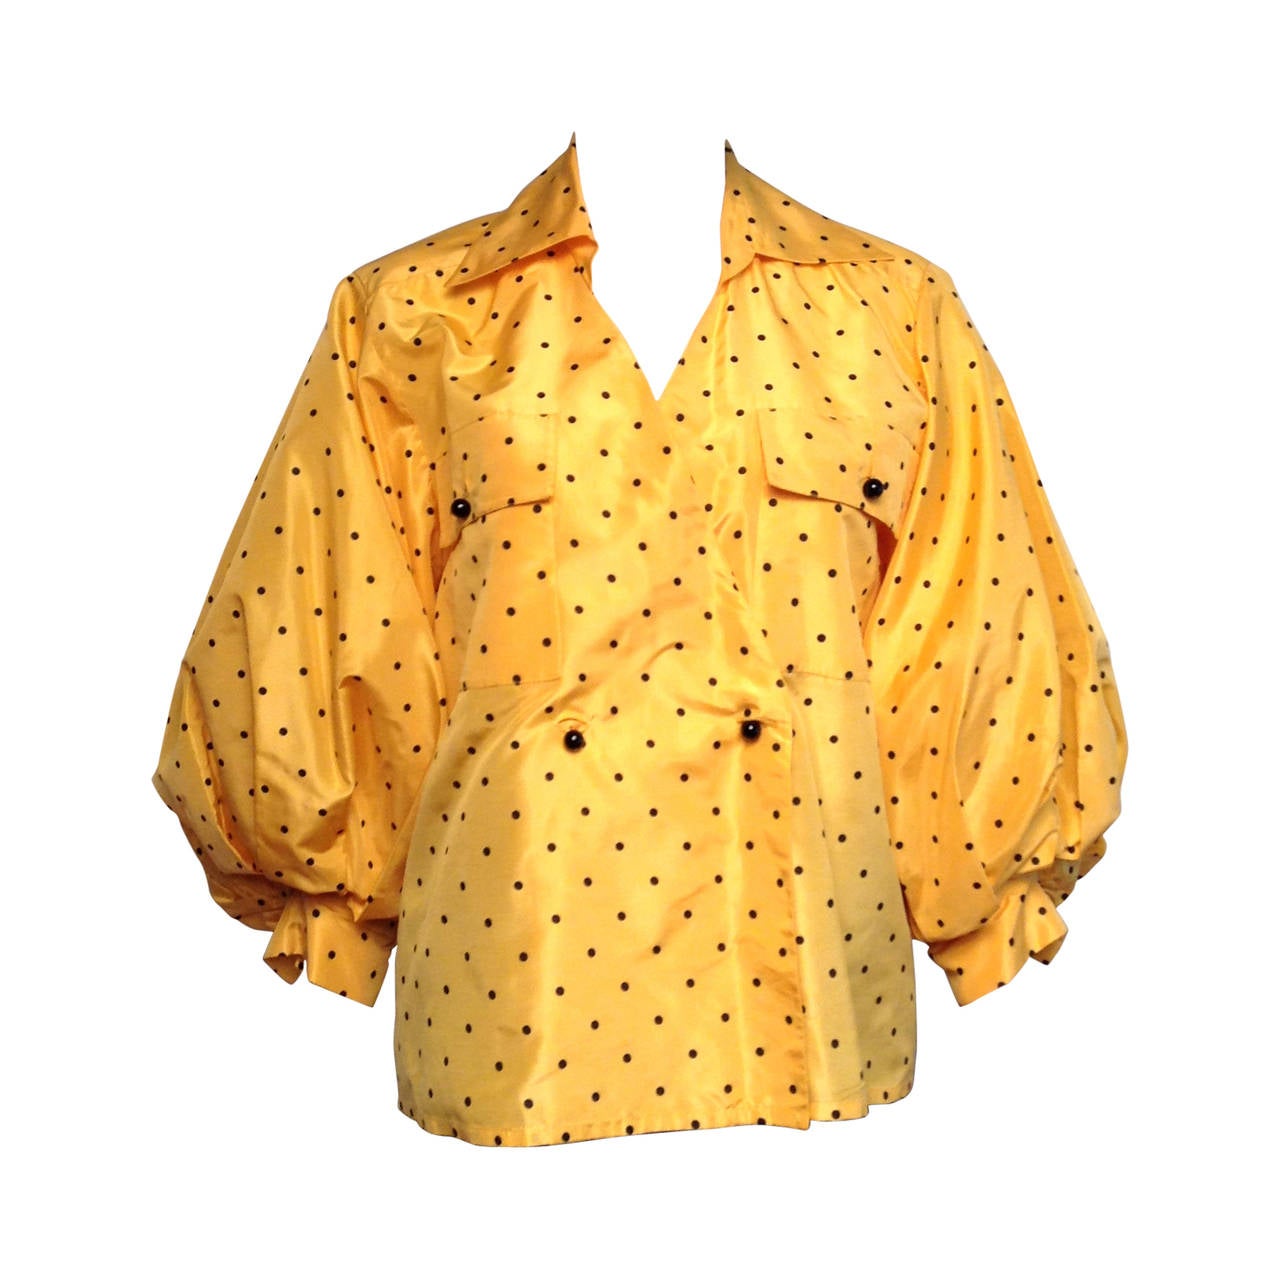 Christian Dior Vintage Yellow and Black Polka Dot Blouse Size 36 For Sale